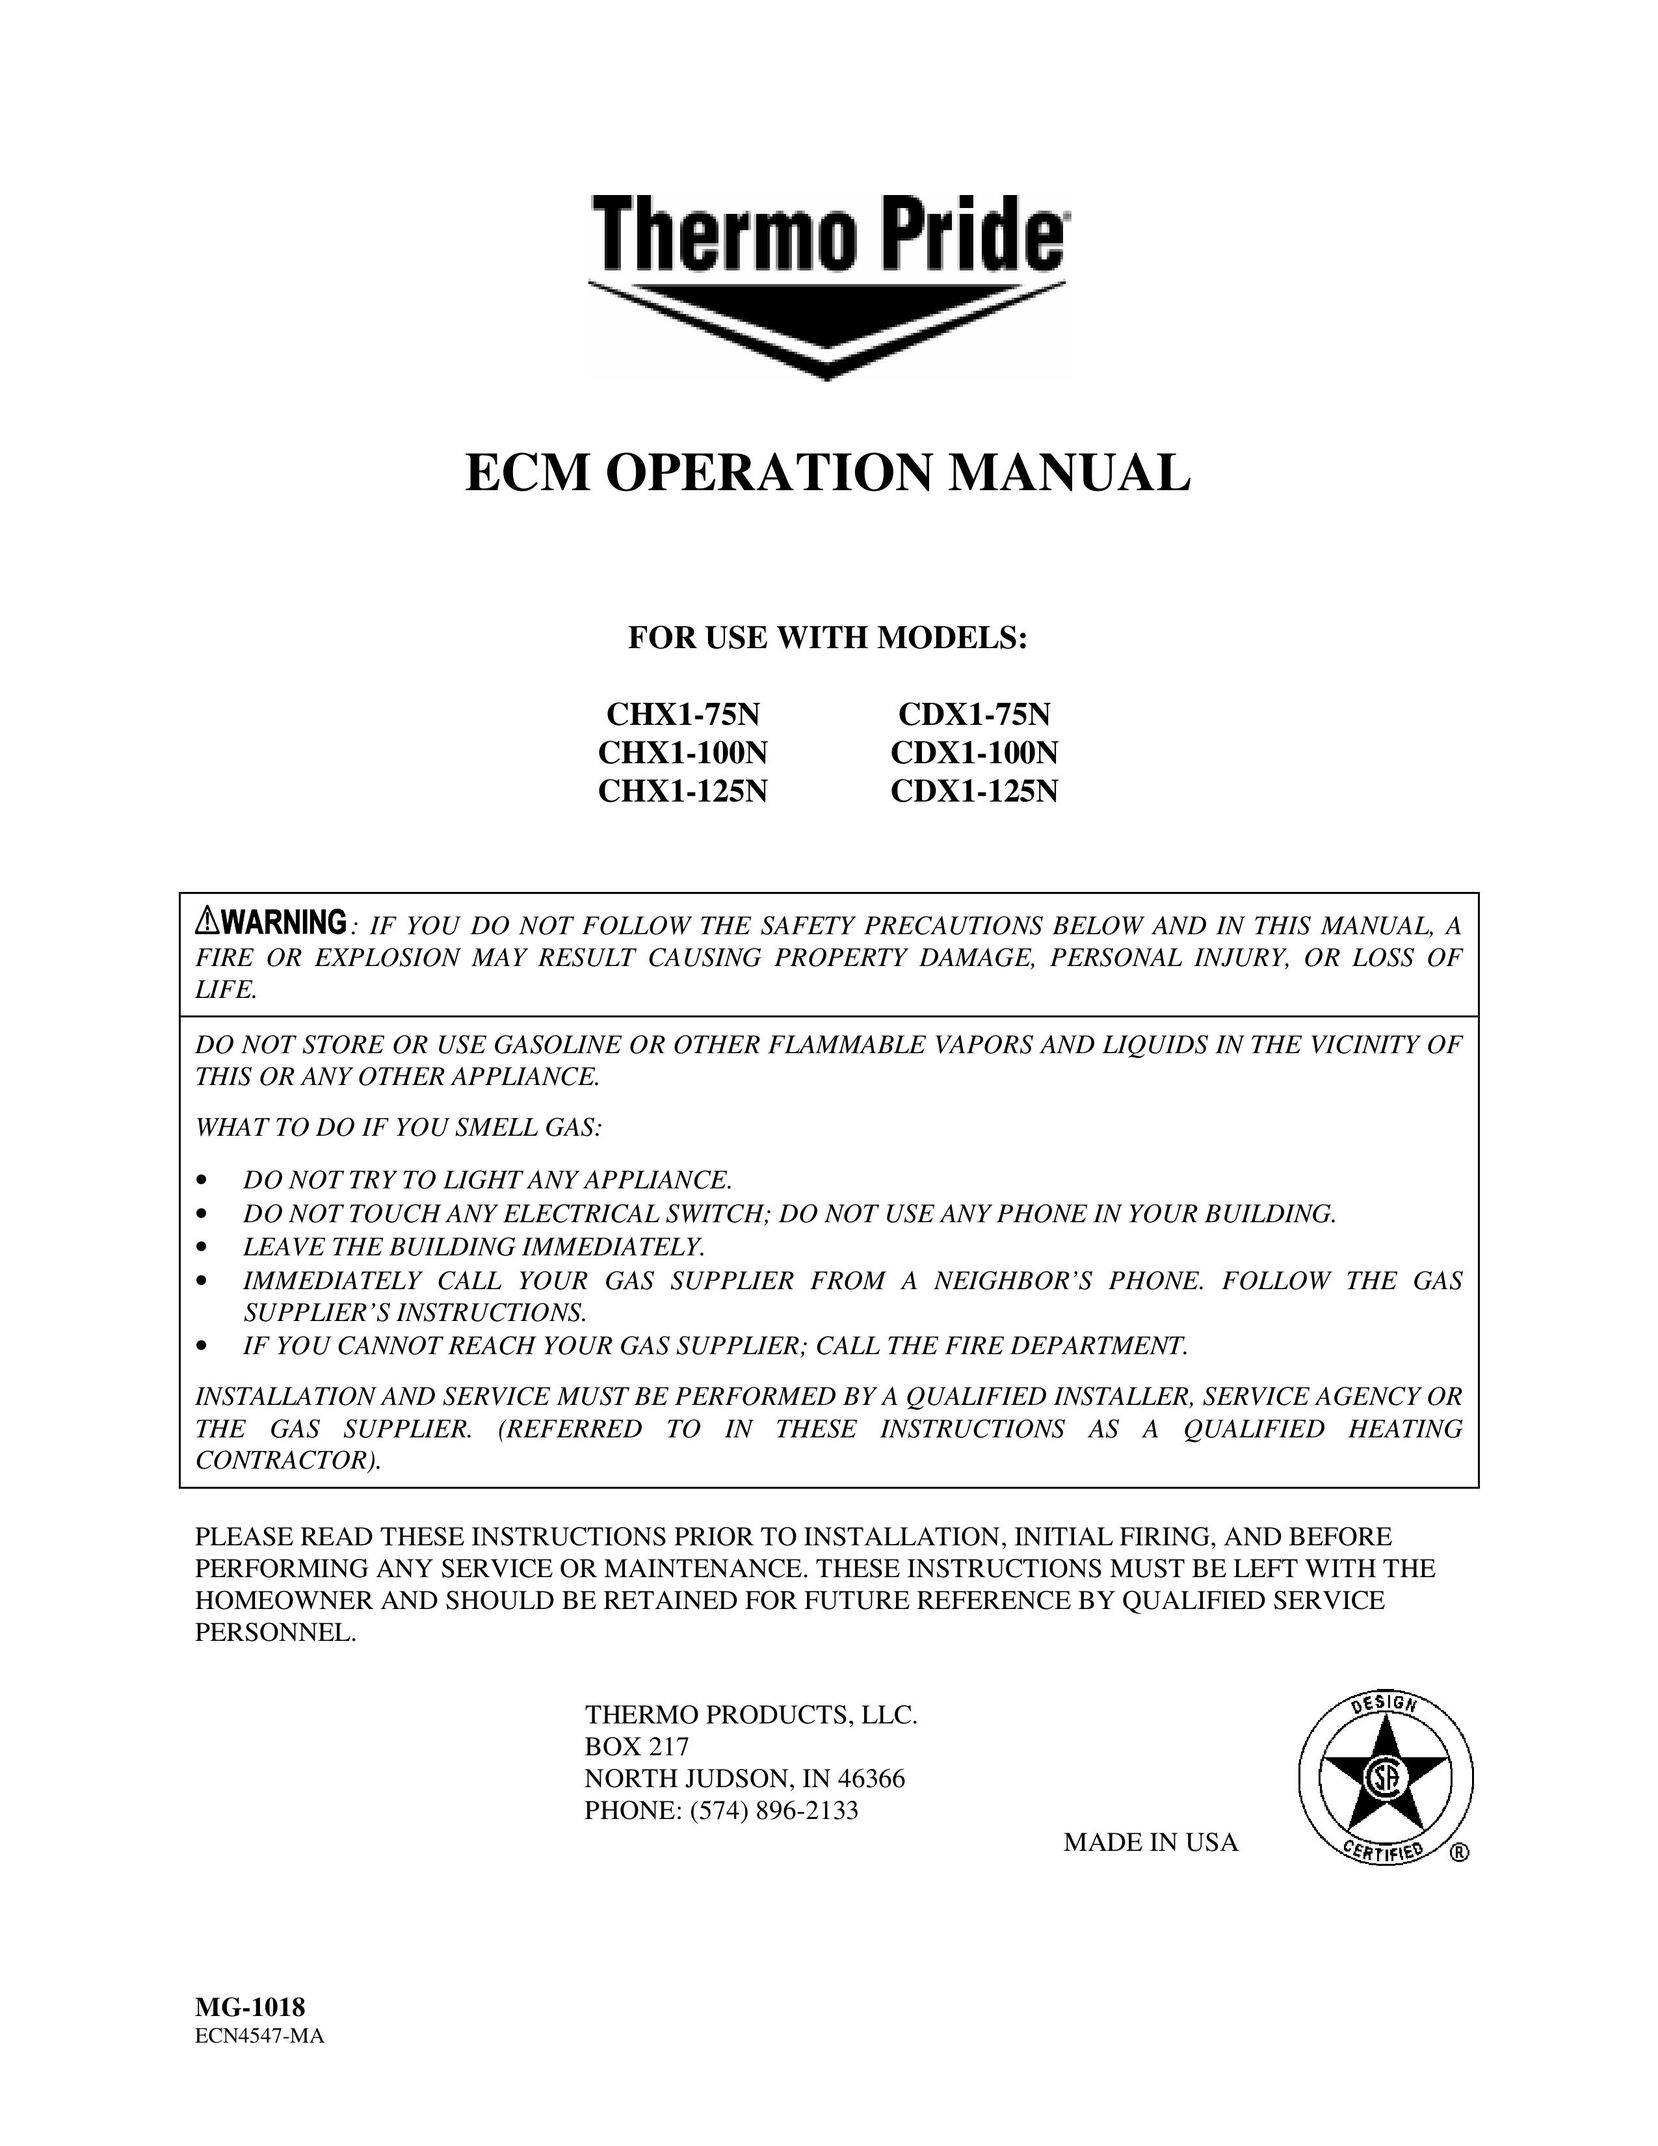 Thermo Products MG-1018 Burner User Manual